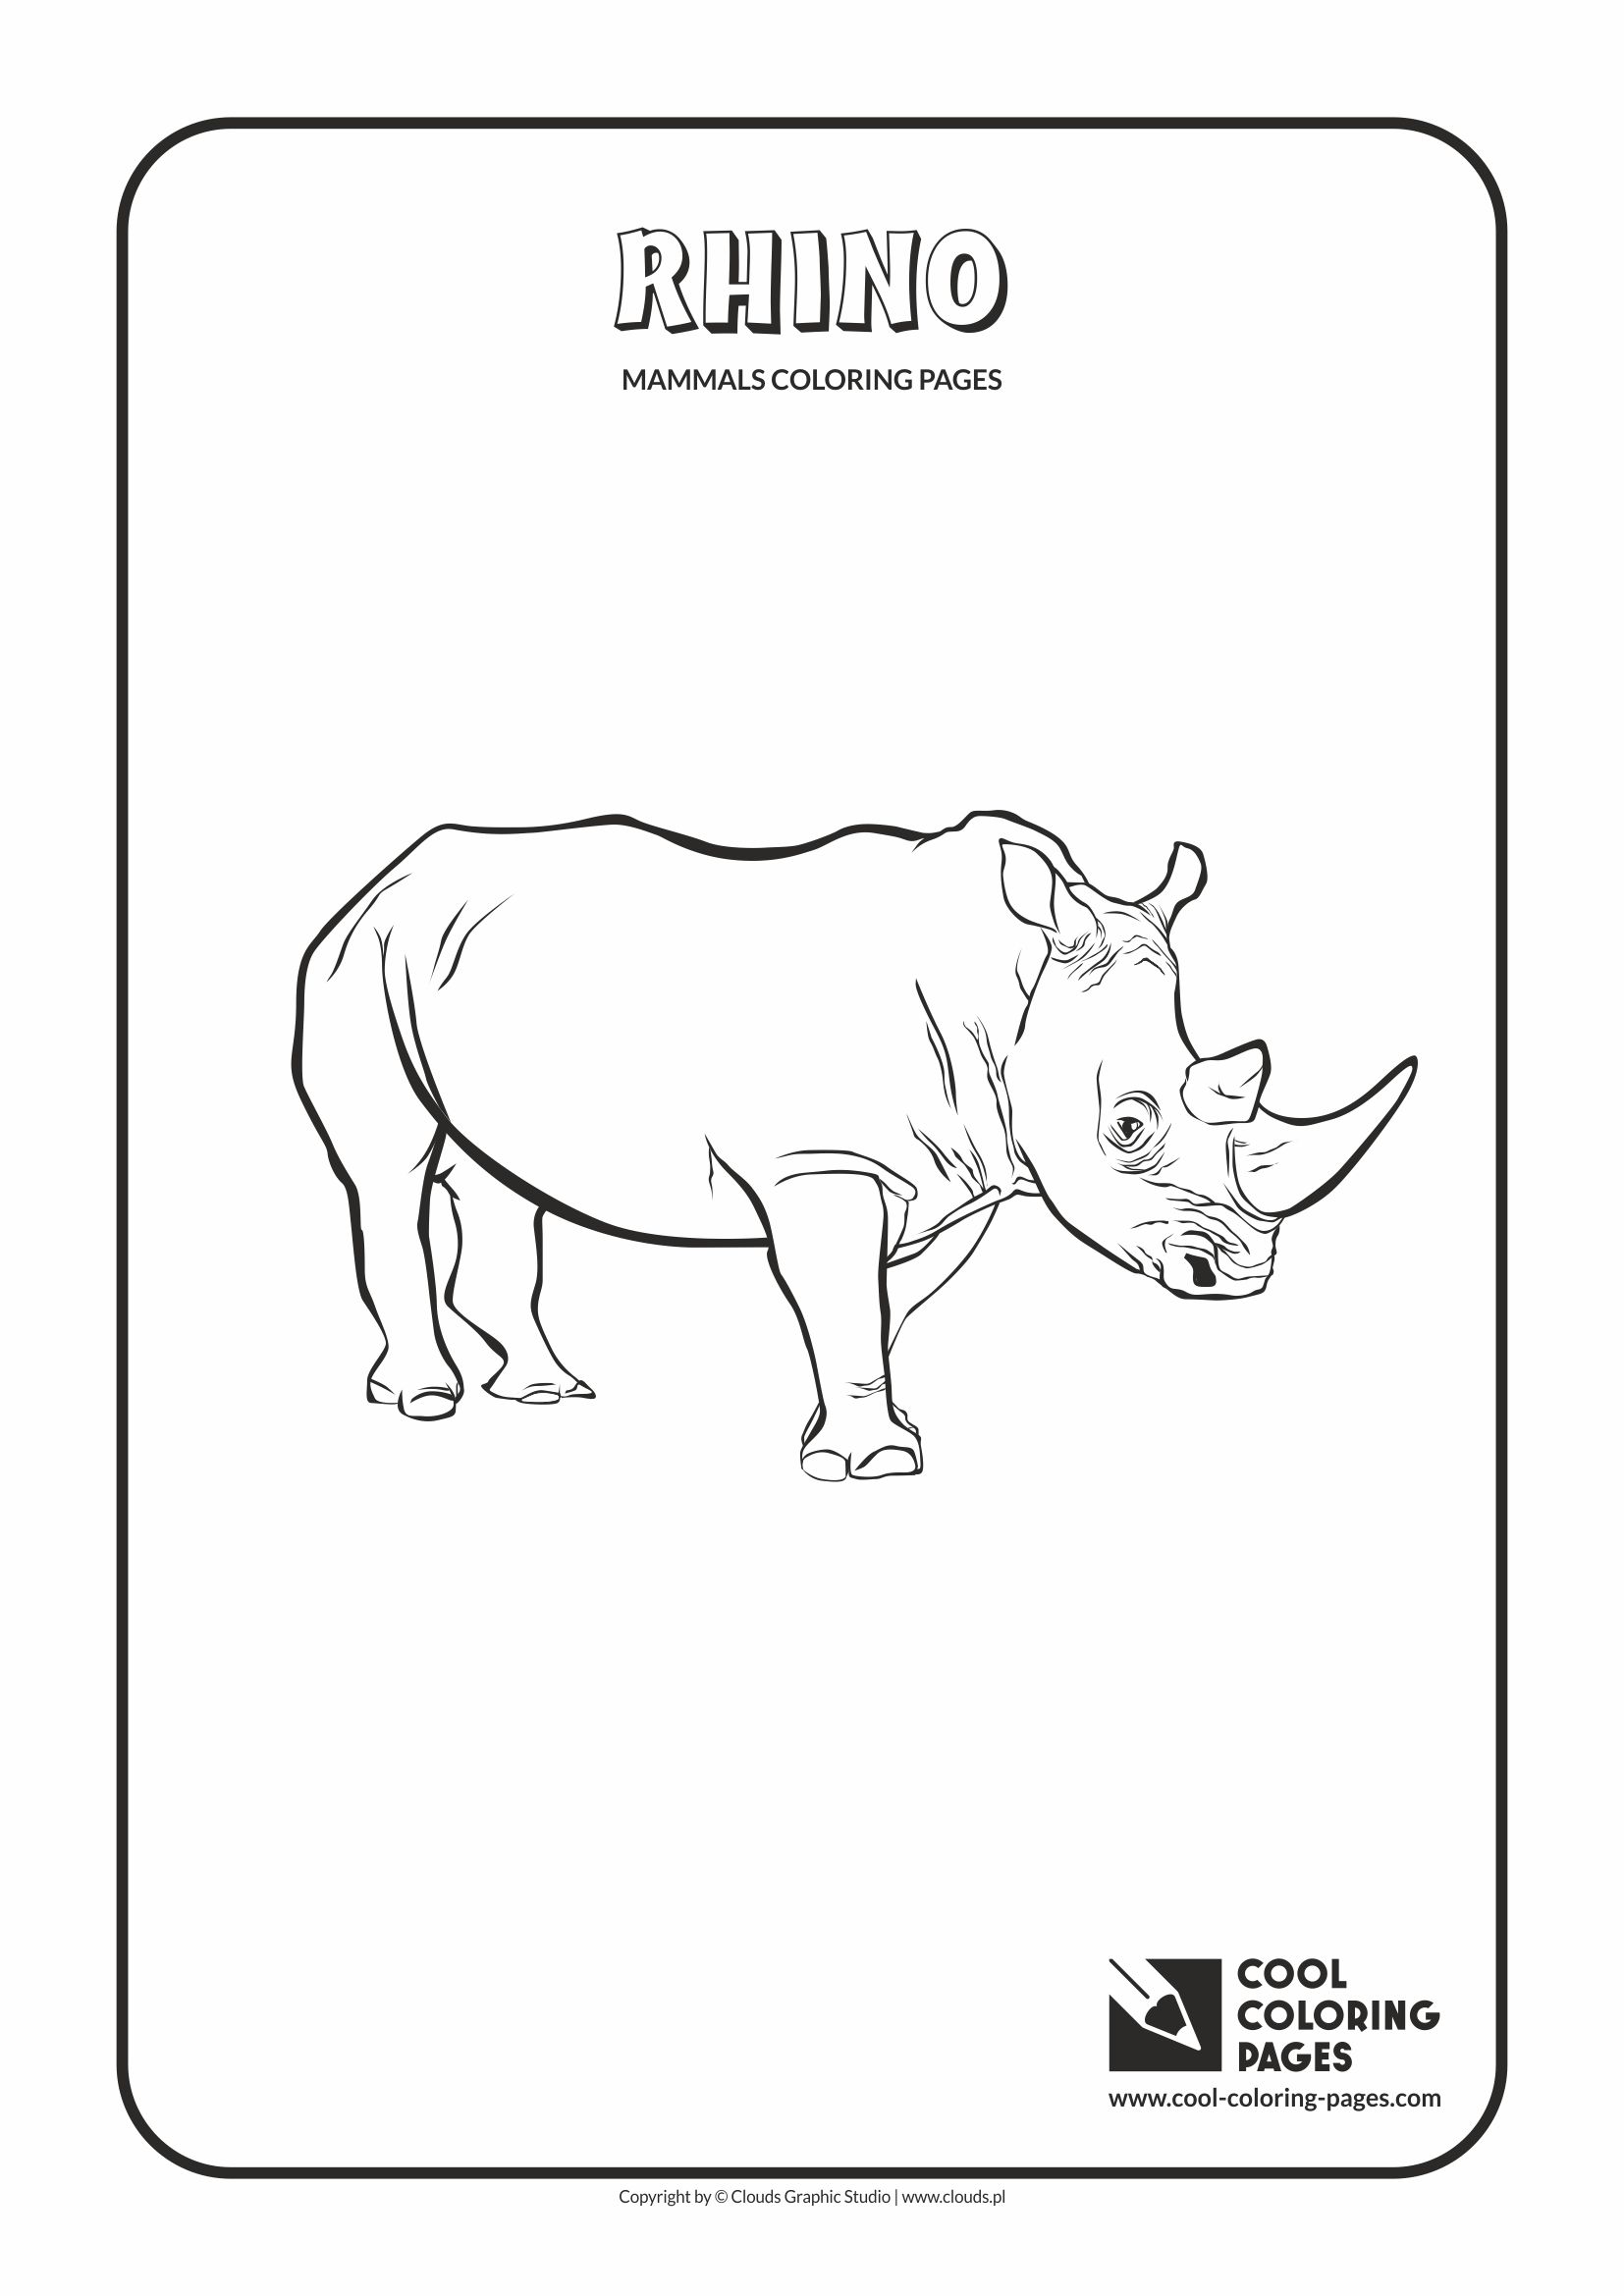 Cool Coloring Pages - Animals / Rhino / Coloring page with rhino